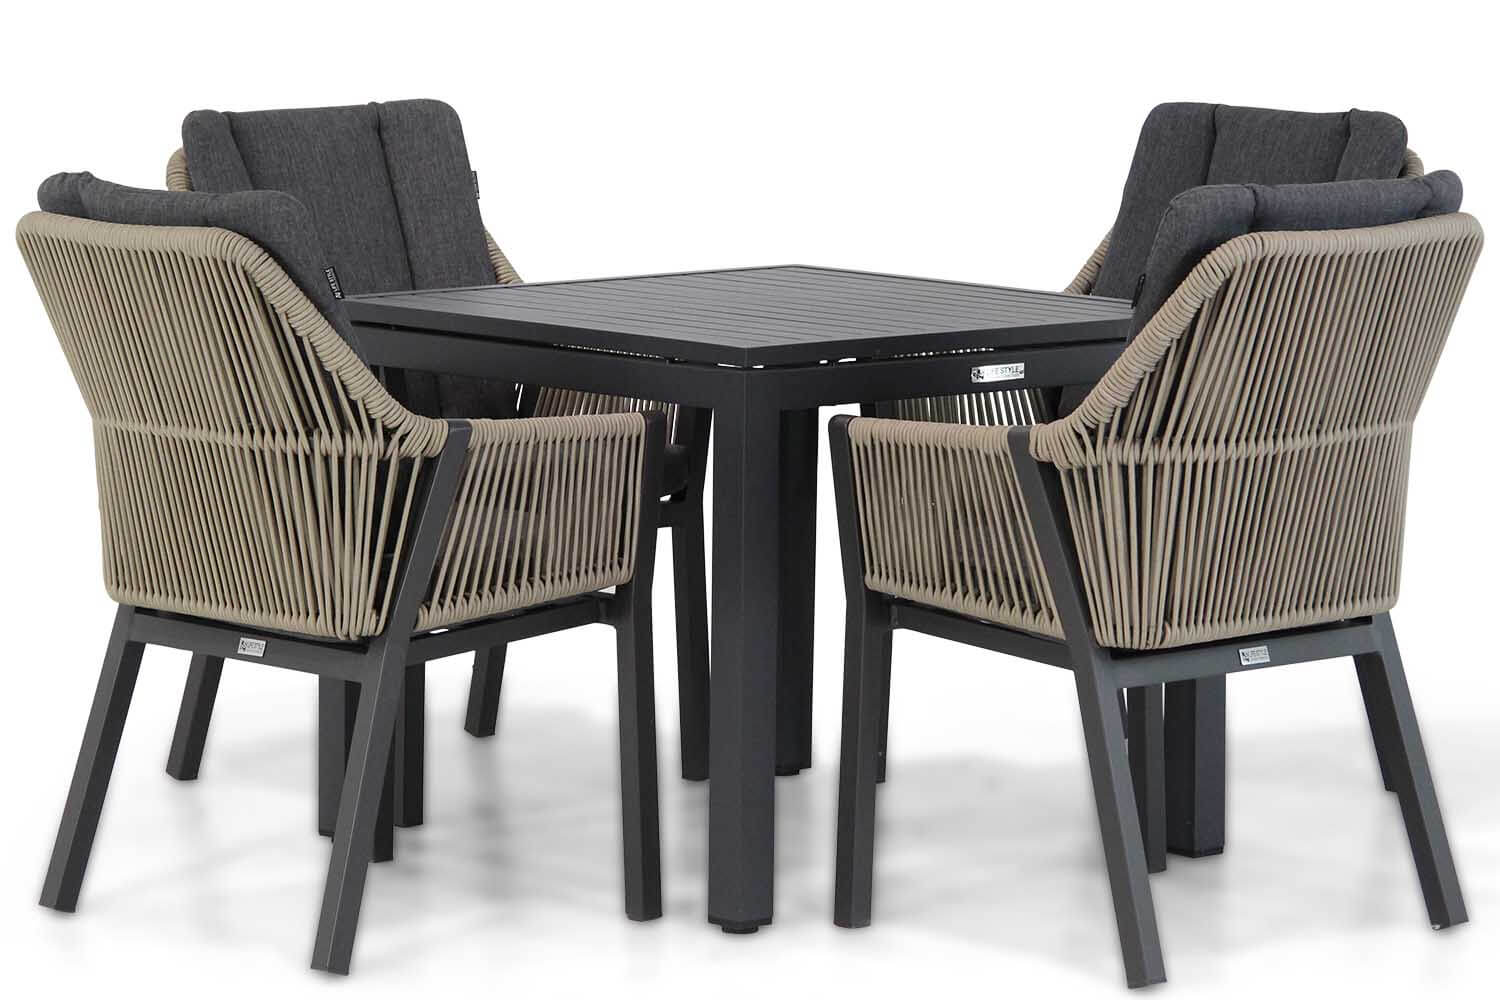 verona rope dining tuinstoel taupe met concept dining tuintafel 90 cm 5 delig - Lifestyle Verona/Concept 90 cm dining tuinset 5-delig